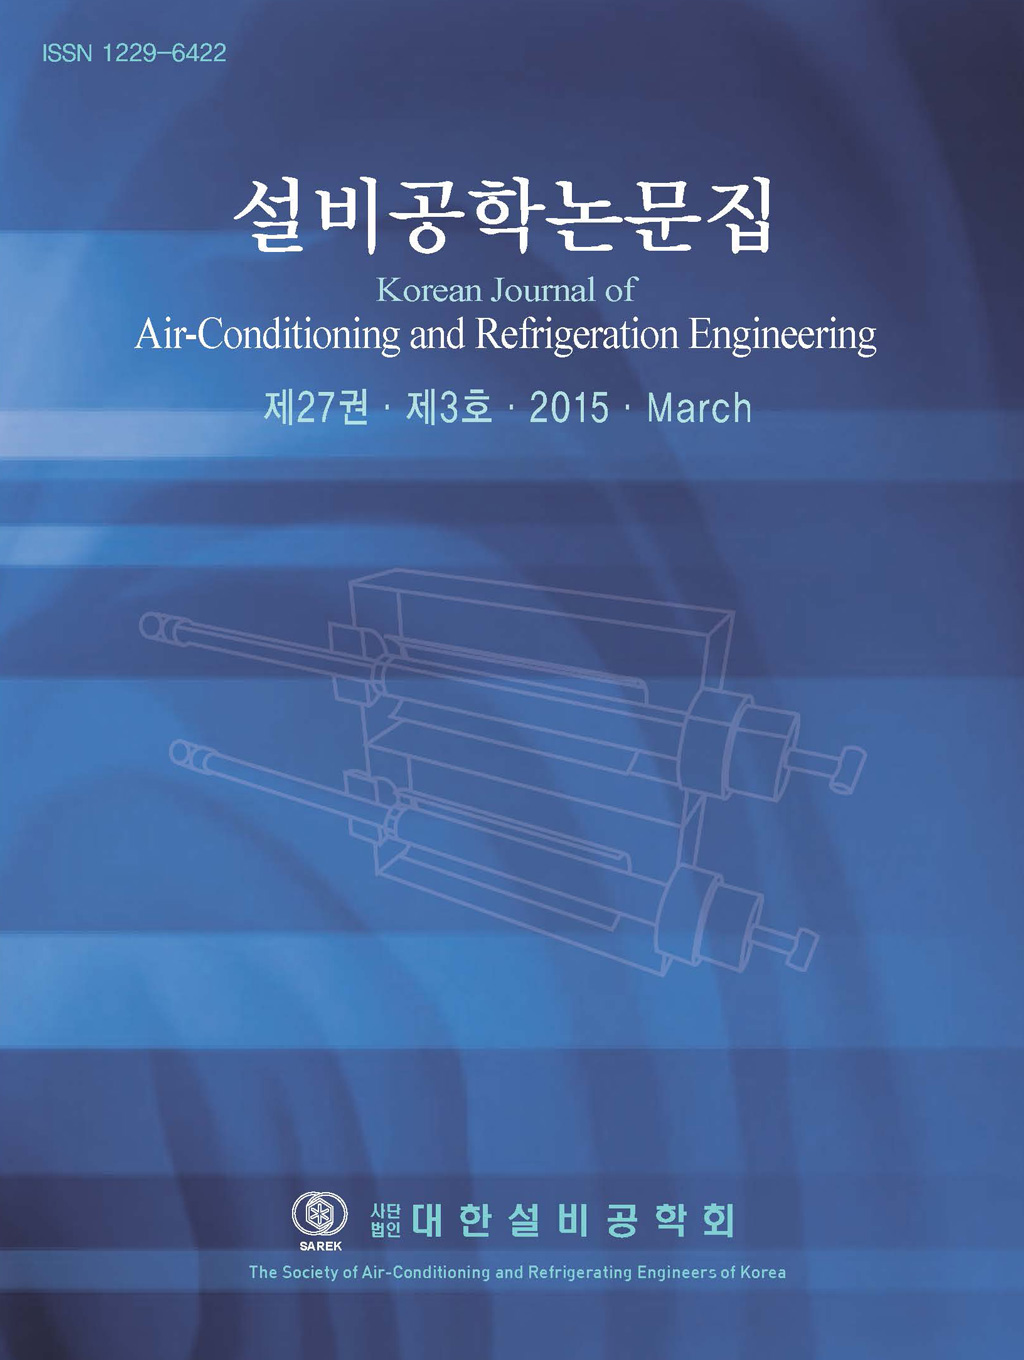 Korean Journal of Air-Conditioning and Refrigeration Engineering